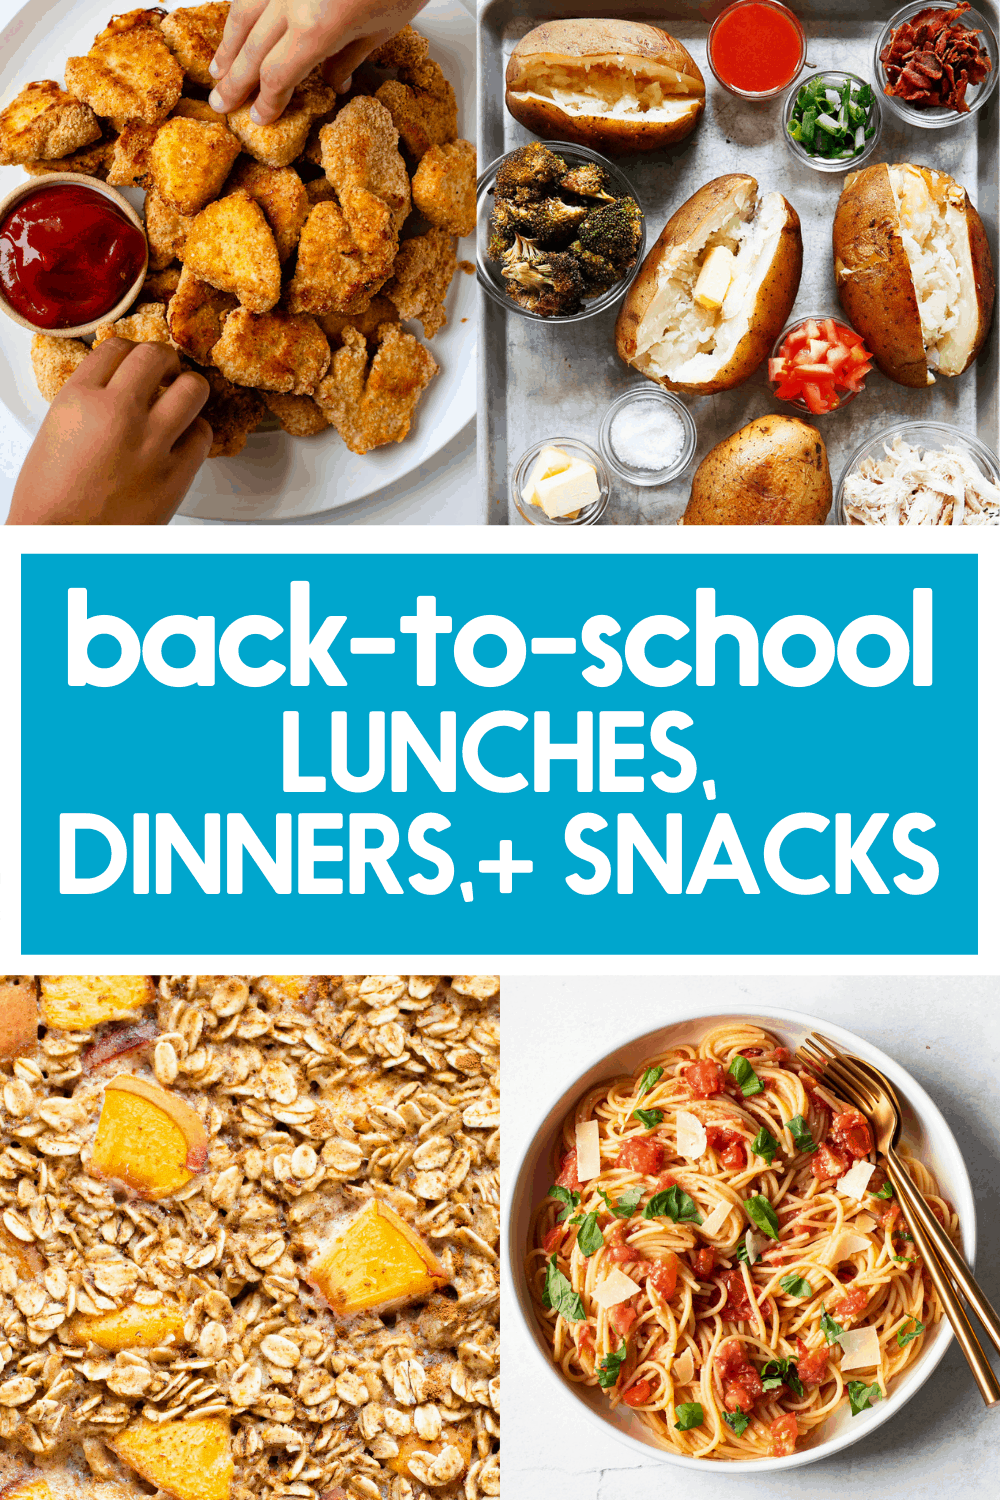 50 Back To School Gluten-Free Lunches, Dinners, and Snacks